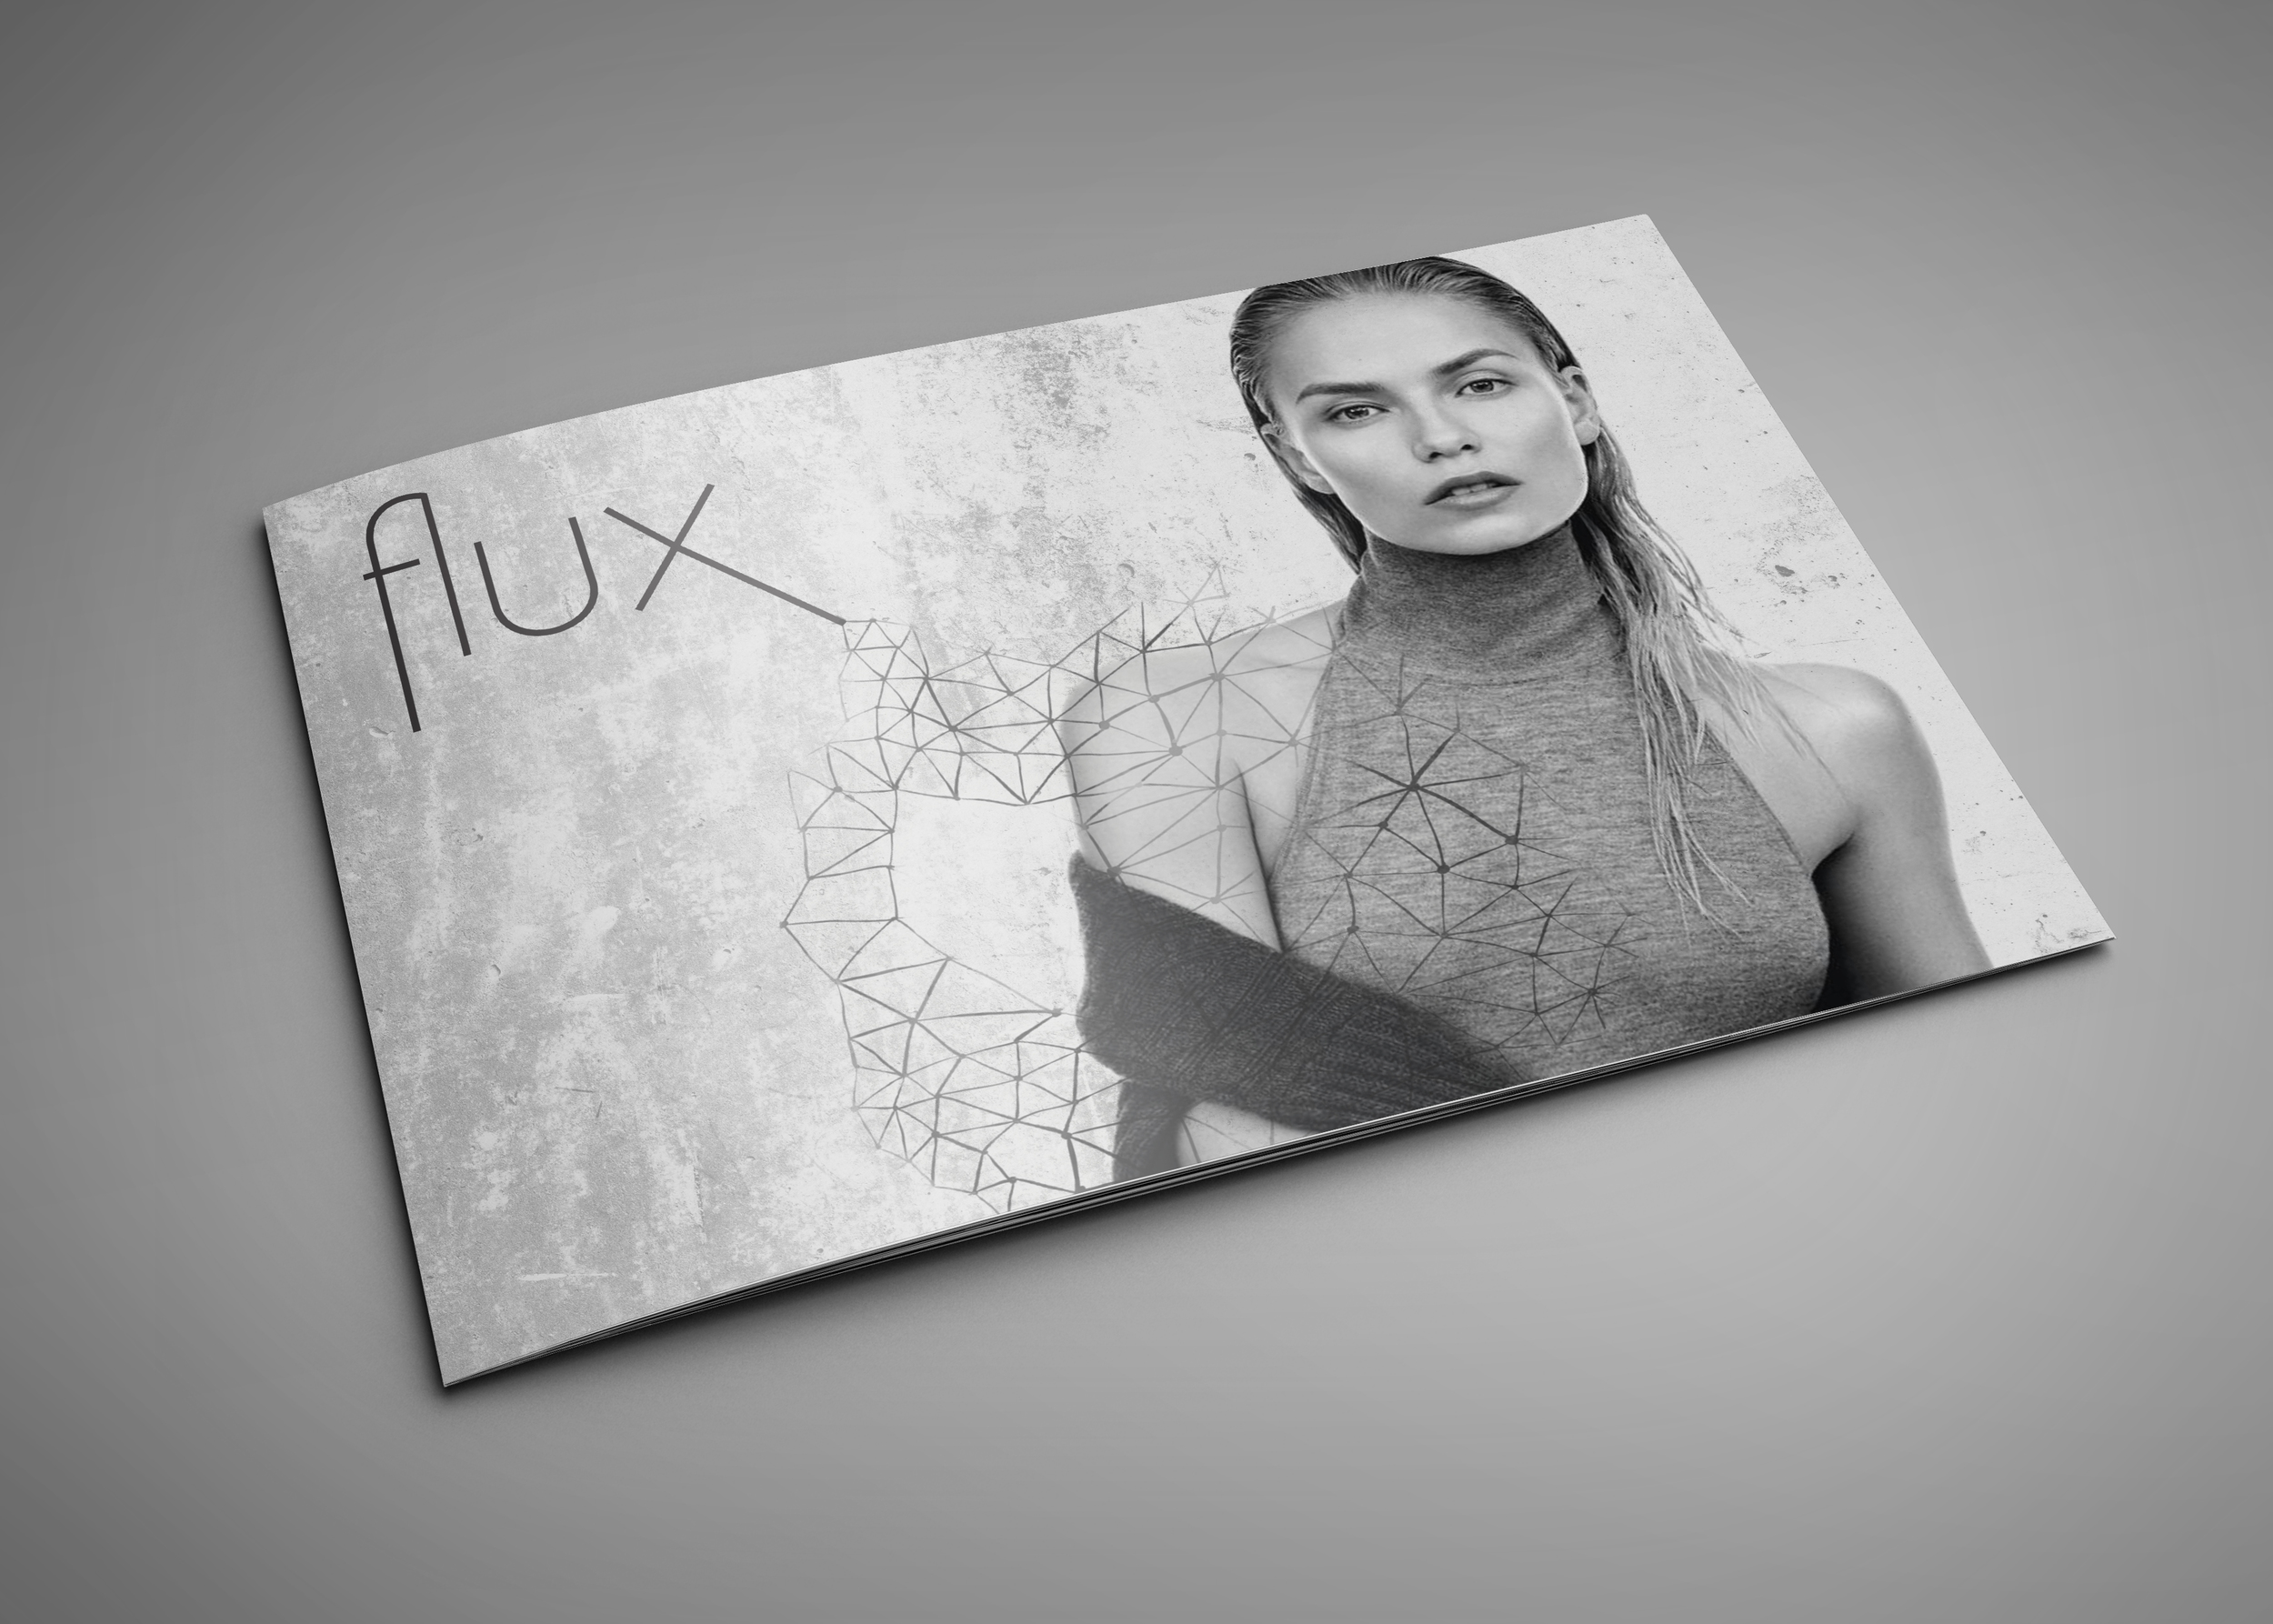     Flux is a mock company created for the class Contemporary Issues &nbsp;at the Savannah College of Art and Design. The assignment was to create a both ethically and environmentally sound company. Flux is a sustainable athletic wear brand for the a